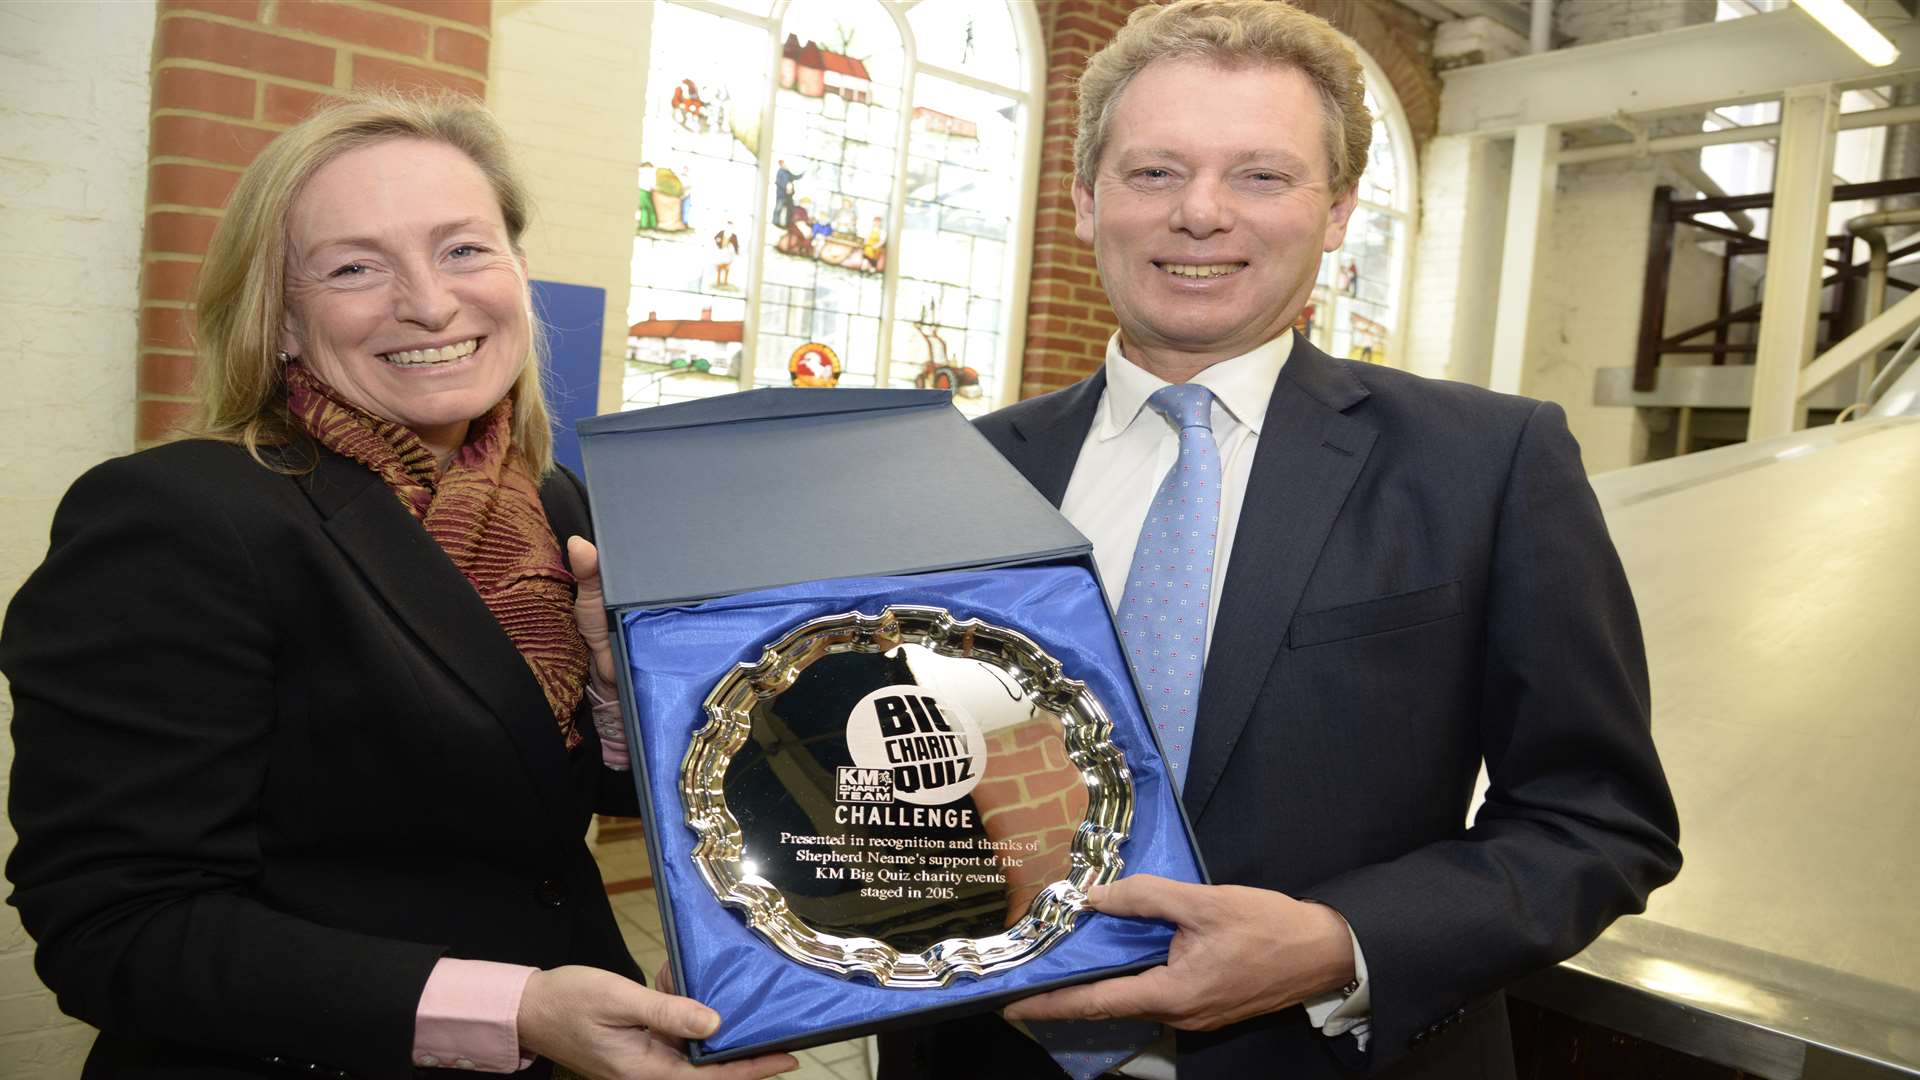 KM Group chairman Geraldine Allison presents Shepherd Neame chairman Jonathan Neame with a silver salver for supporting the KM Big Charity Quiz 2015.